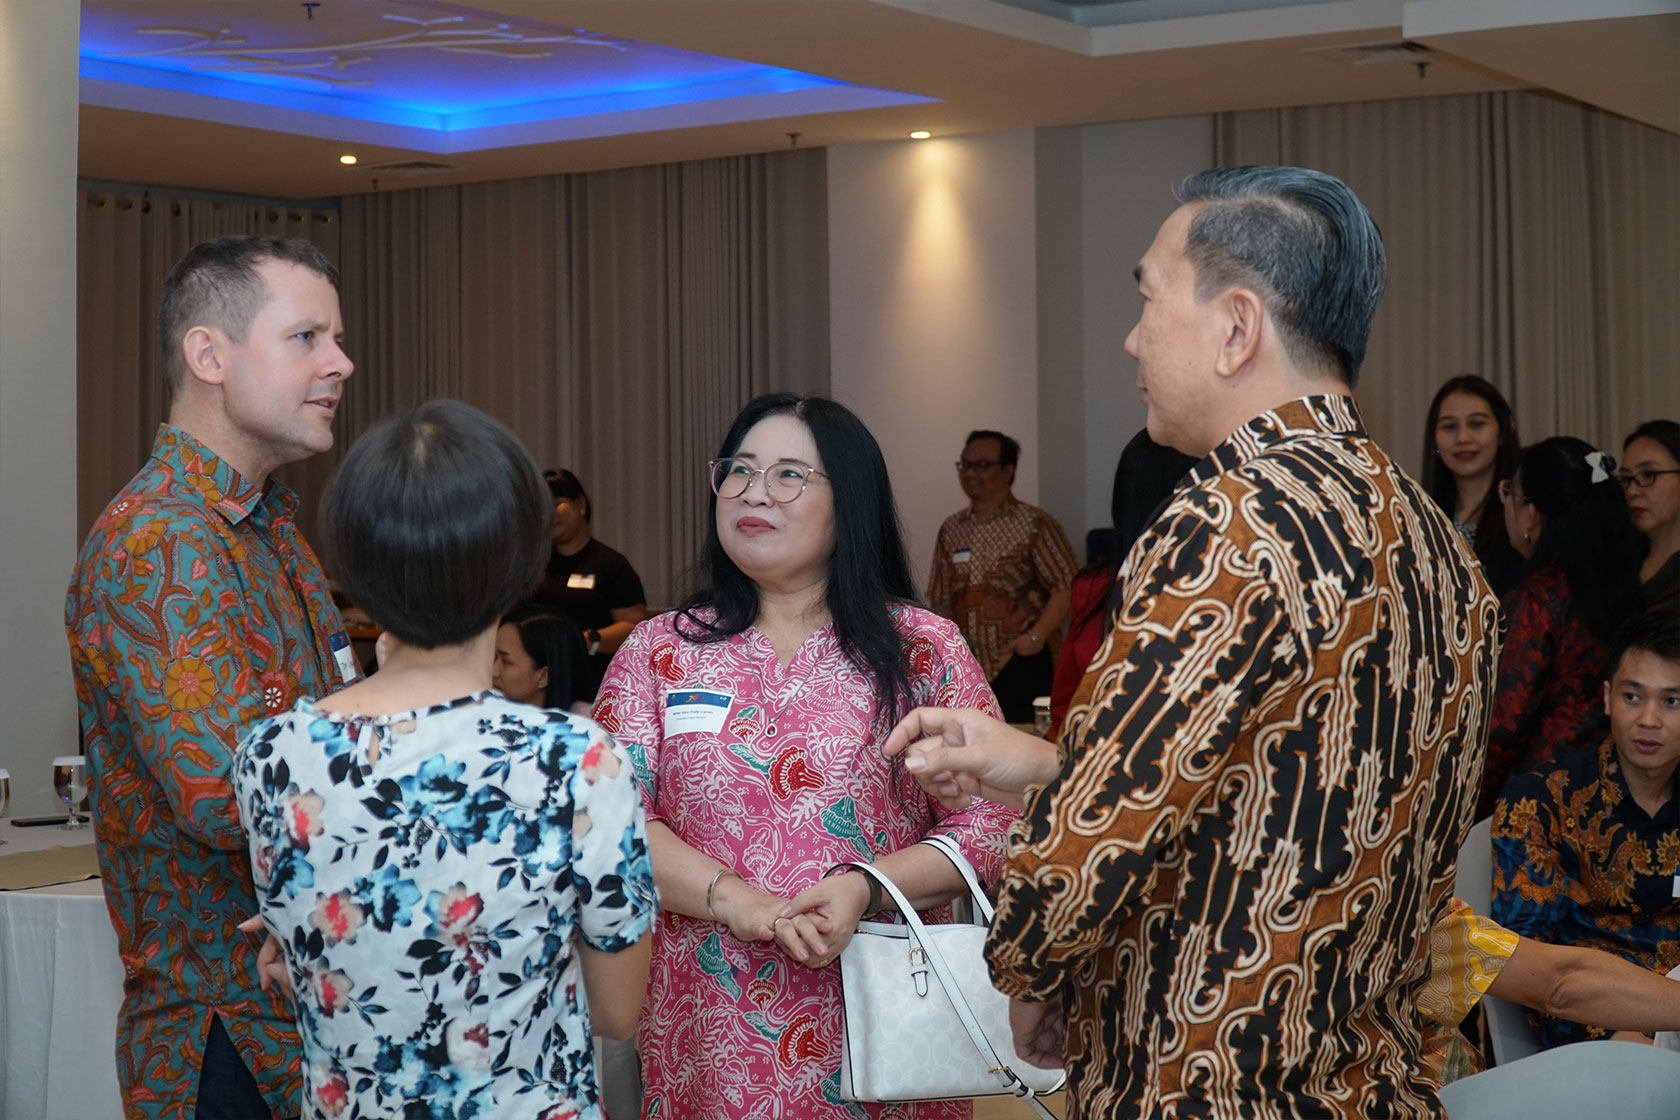 Alumni engage in a lively discussion, sparking the flame of old friendships and weaving new bonds at the networking dinner